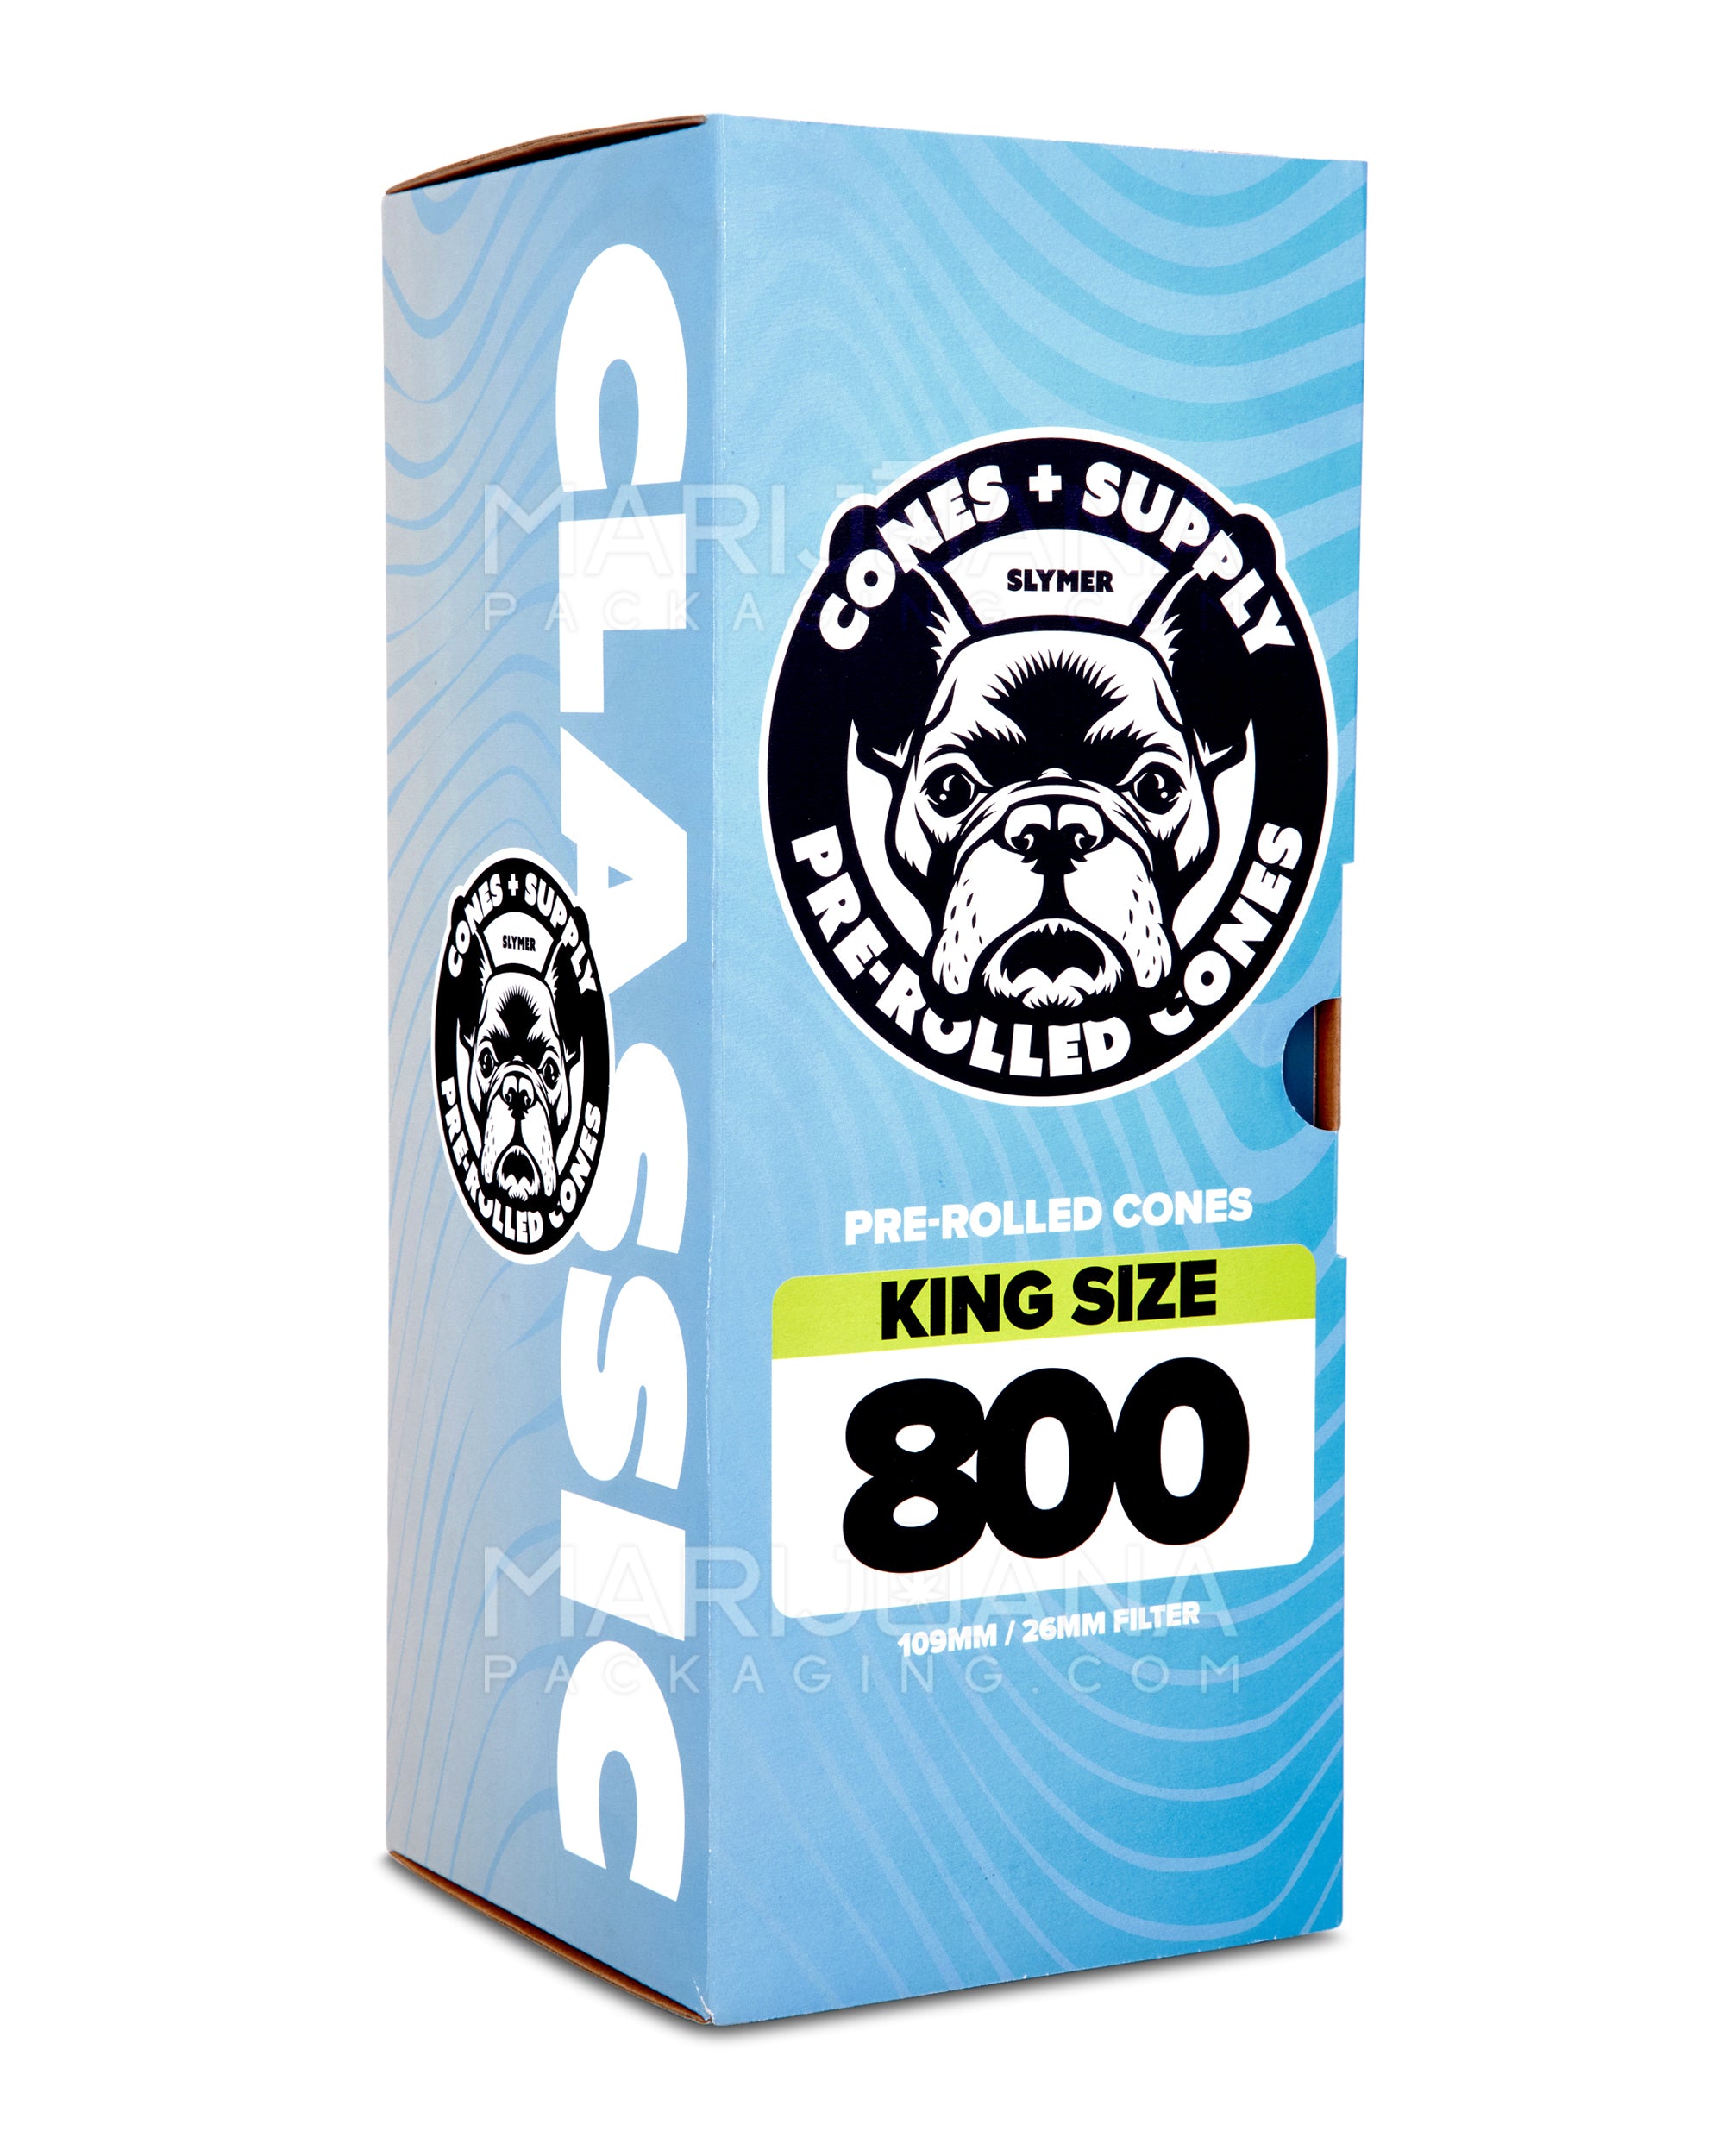 CONES + SUPPLY | King Size Pre-Rolled Cones | 109mm - Classic White Paper - 800 Count - 1